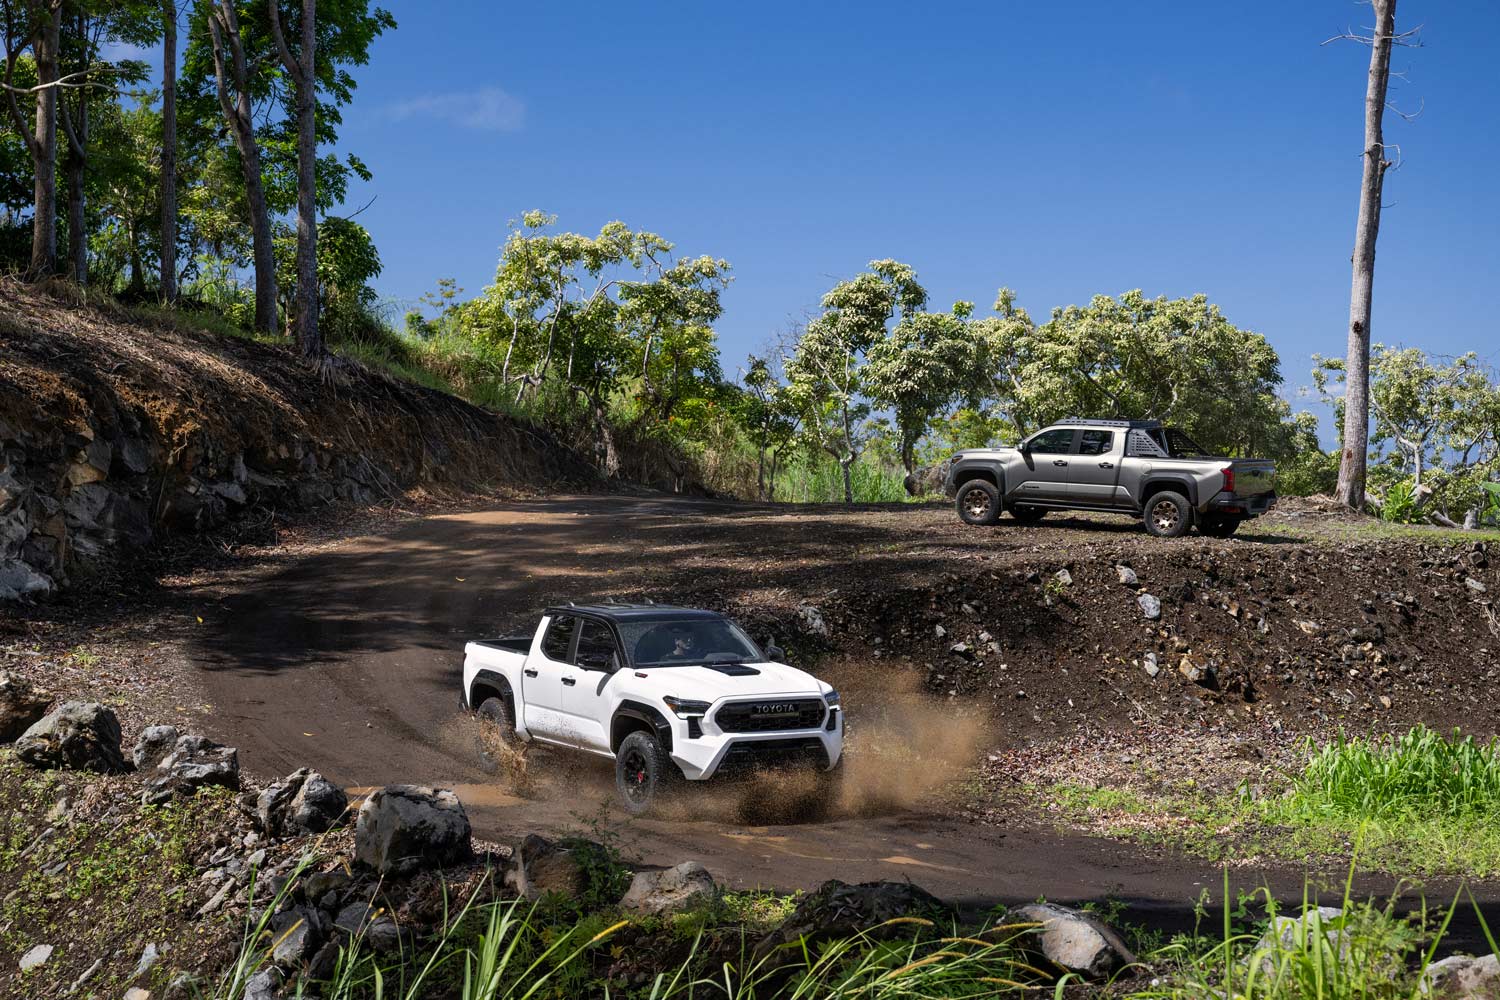 2024 Toyota Tacoma TRD Pro in white drives below 2024 Tacoma Trailhunter in gray